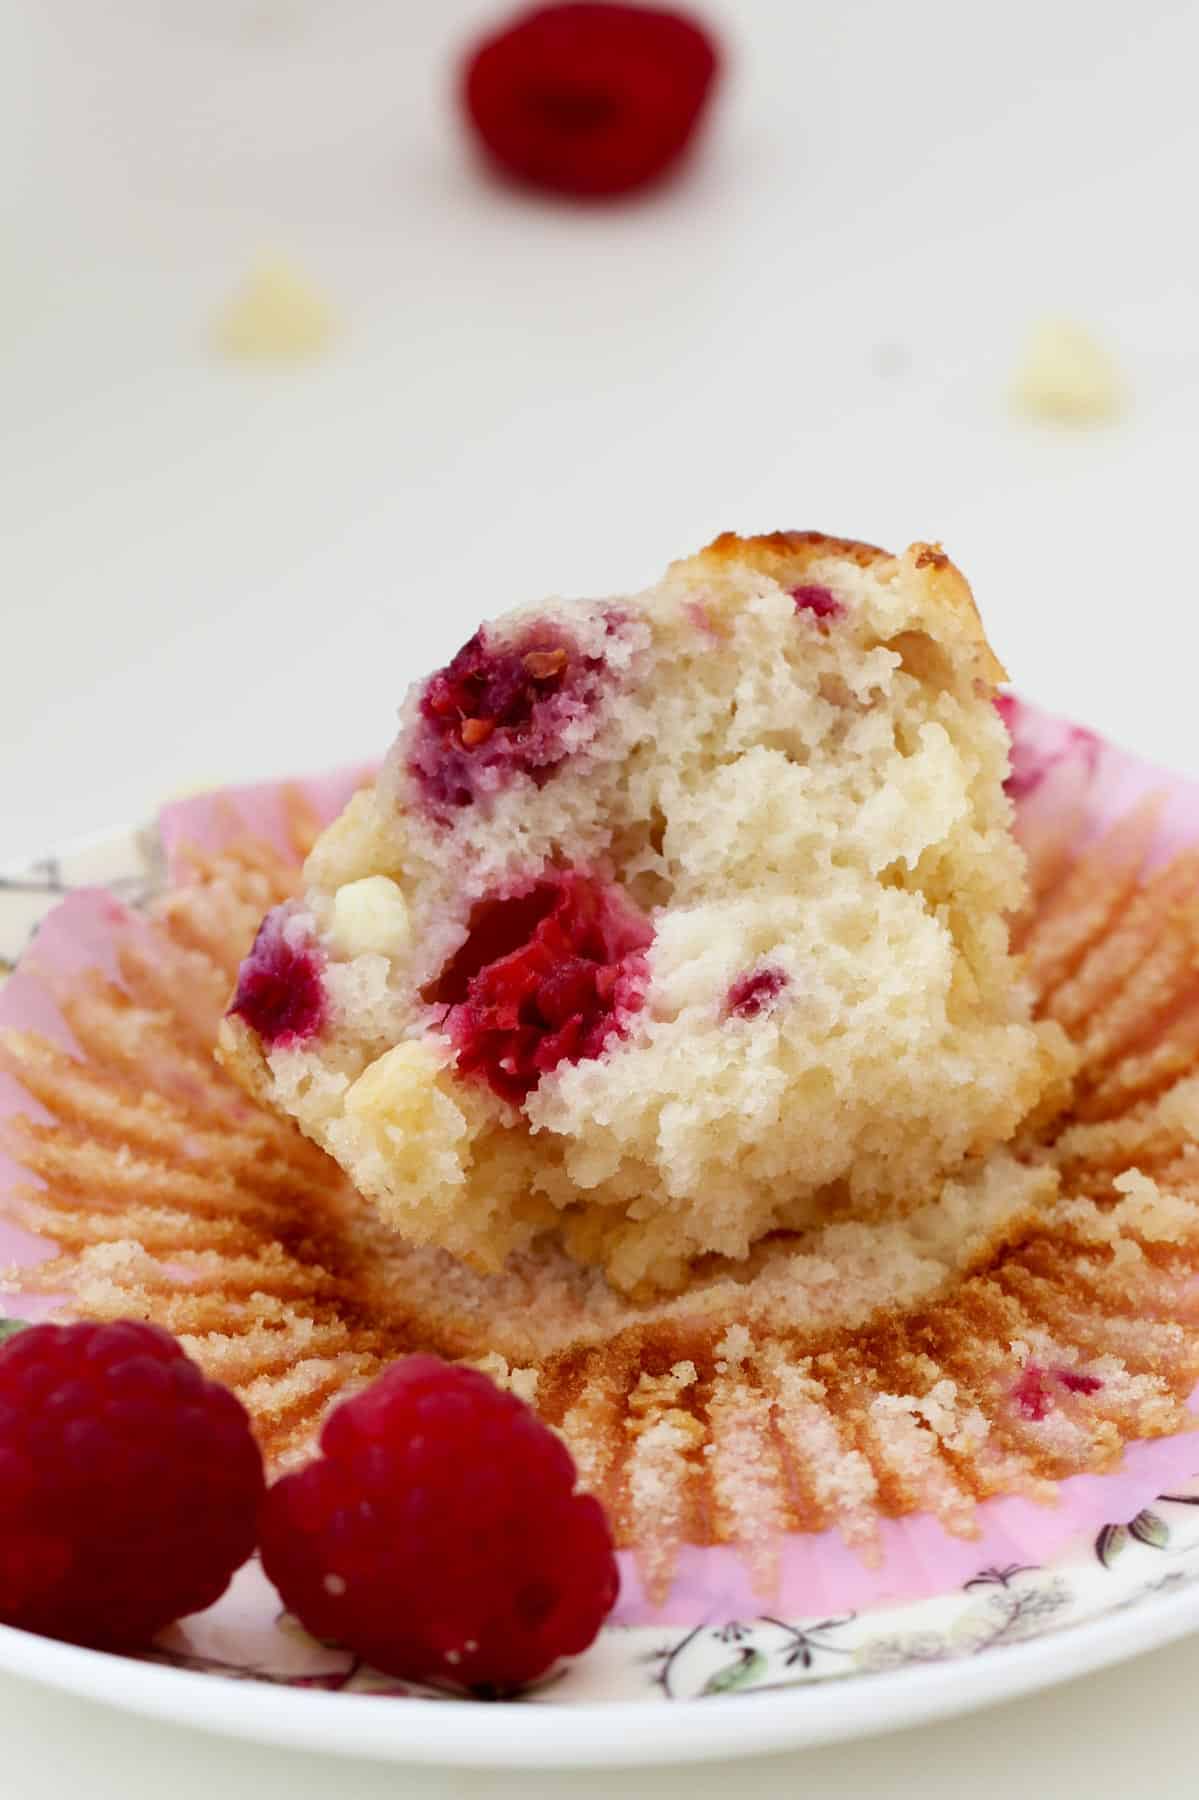 A half eaten muffin with chocolate chips and raspberries throughout.